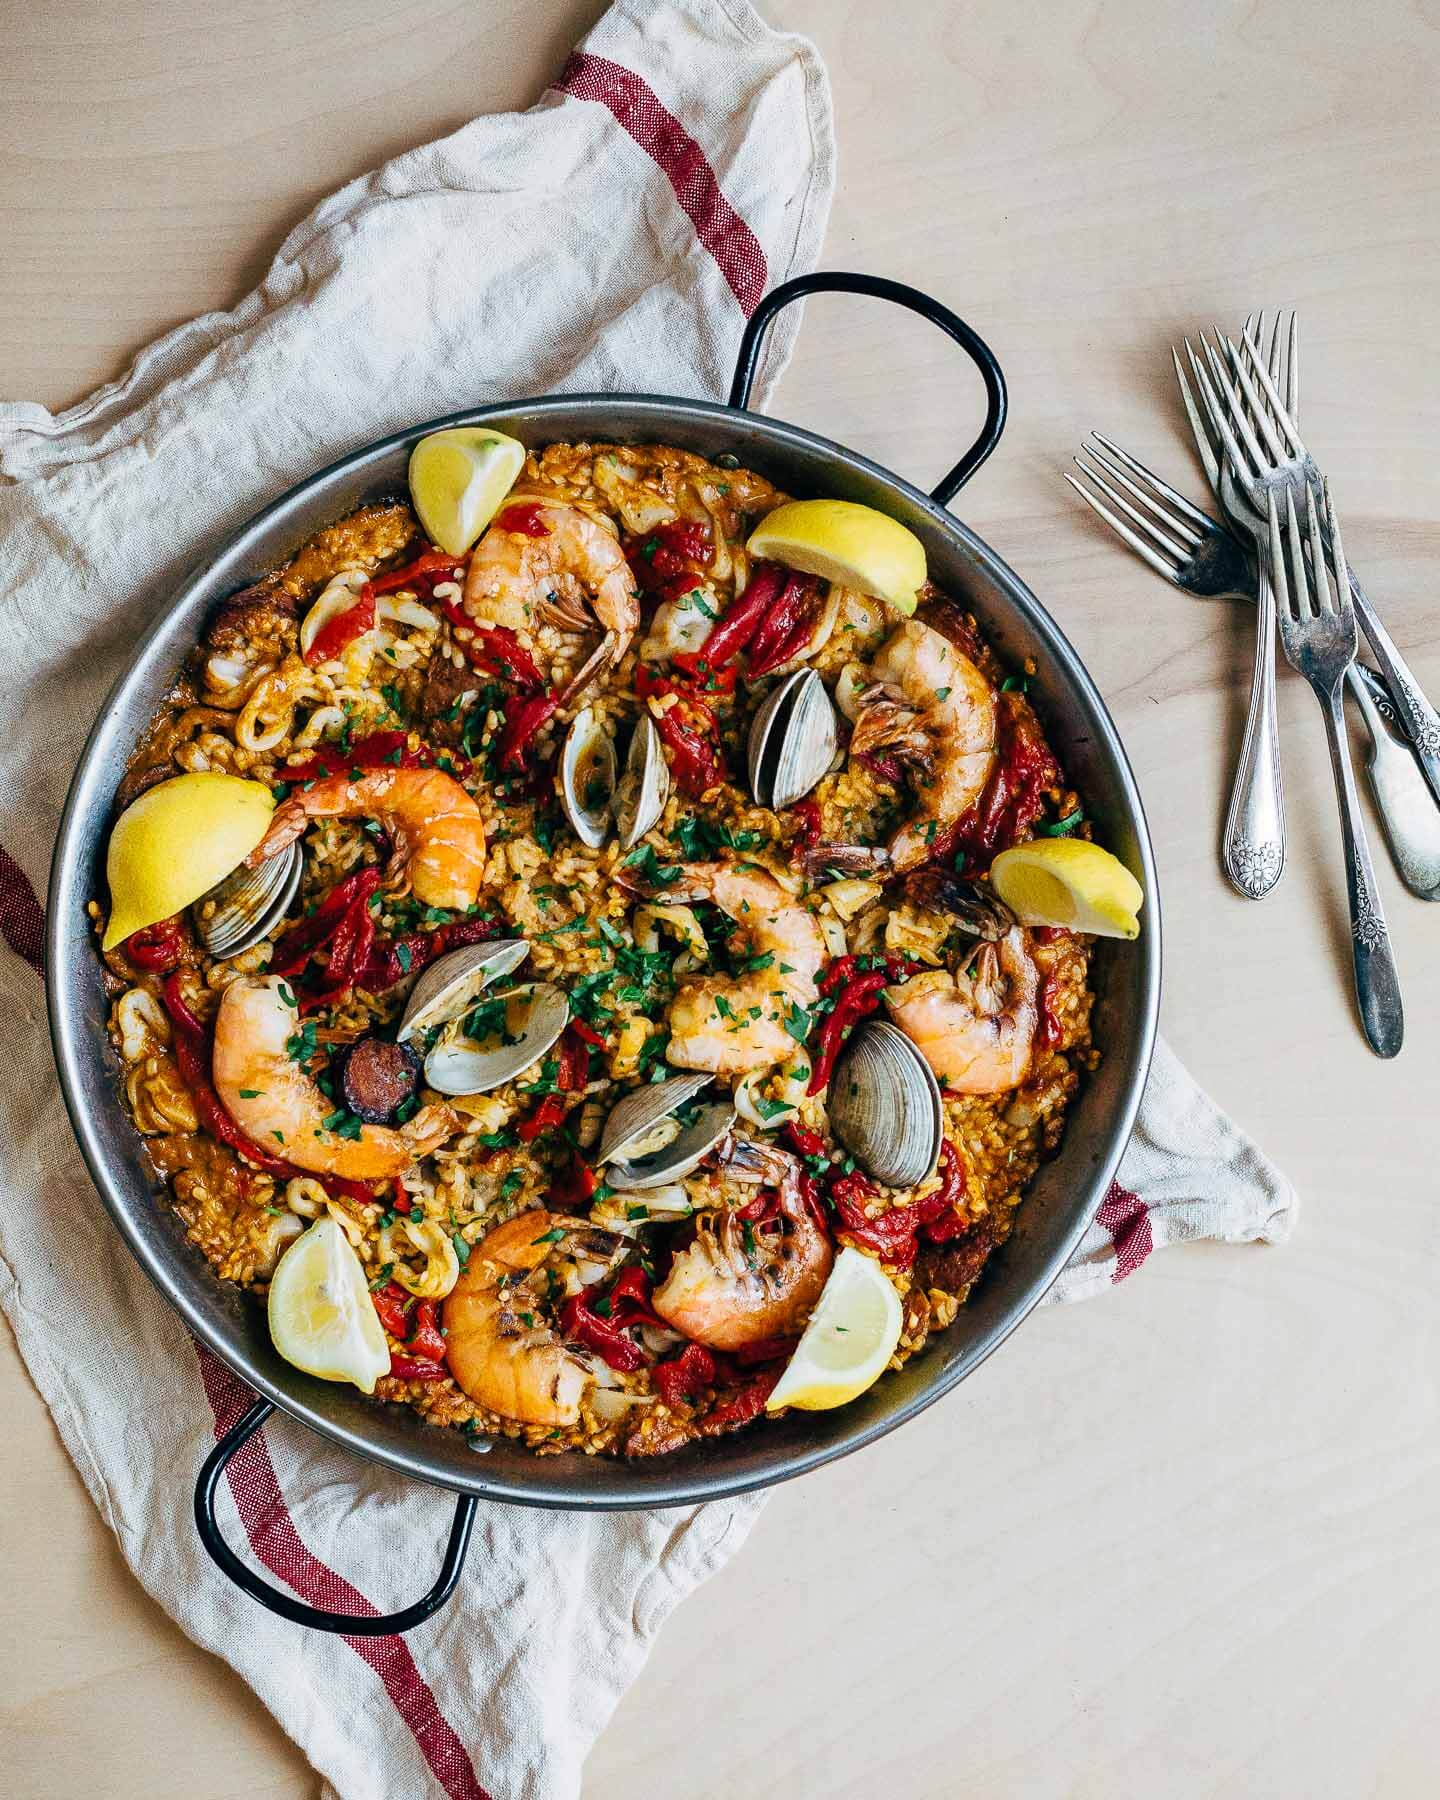 Seafood Paella: How to make the authentic dish, step by step.